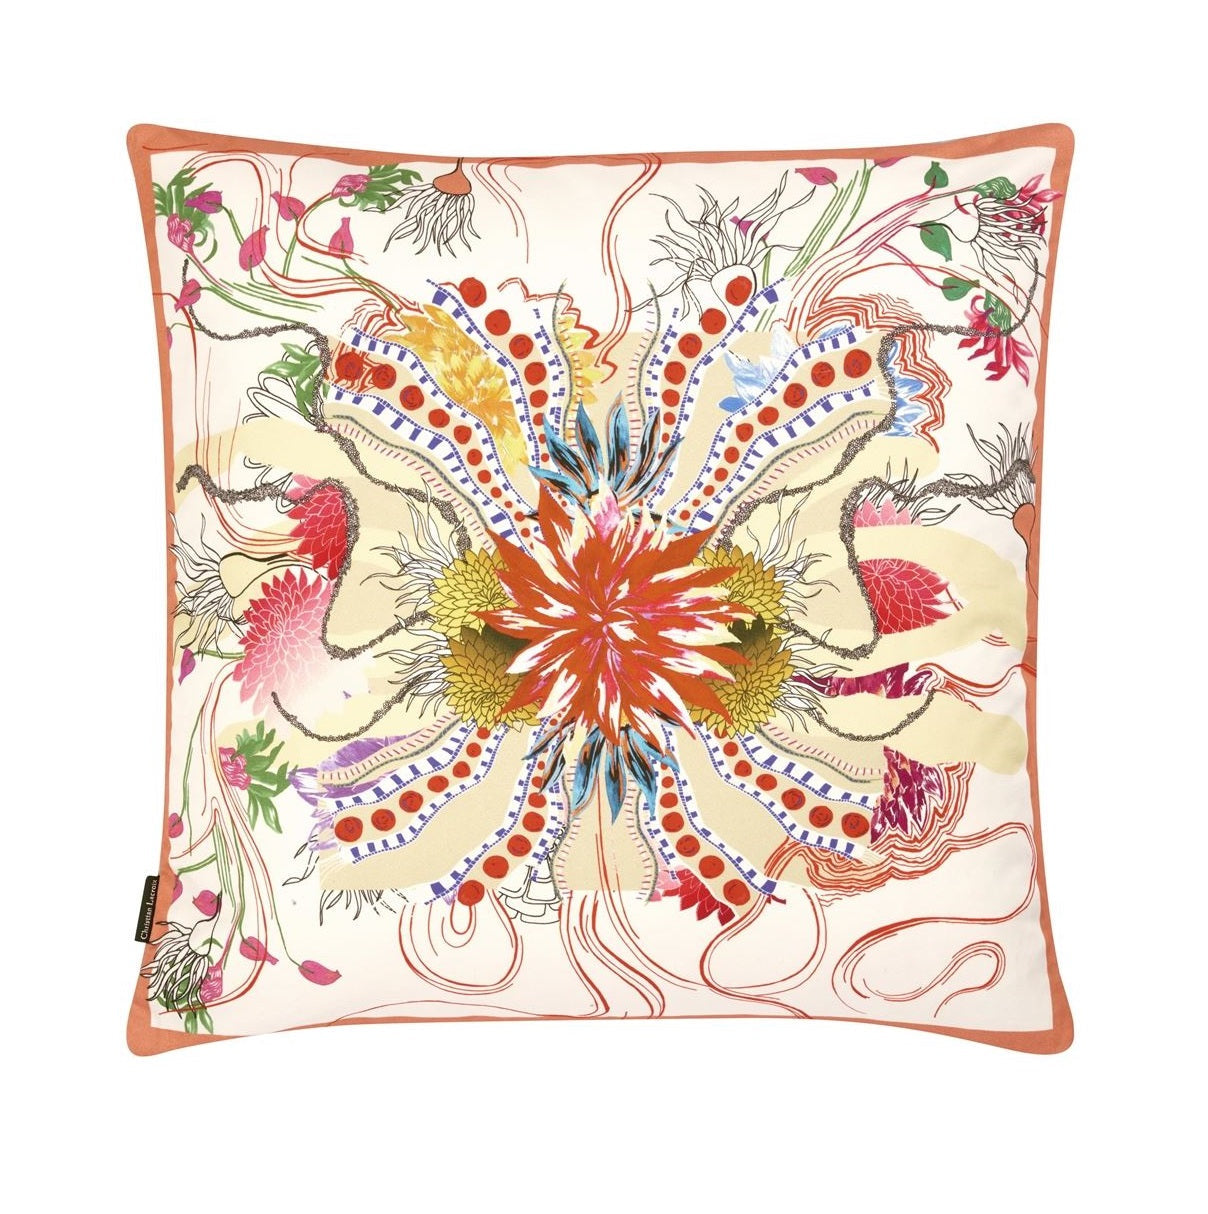 Two-sided pillow OCEAN BLOOMS RUISSEAU cotton satin